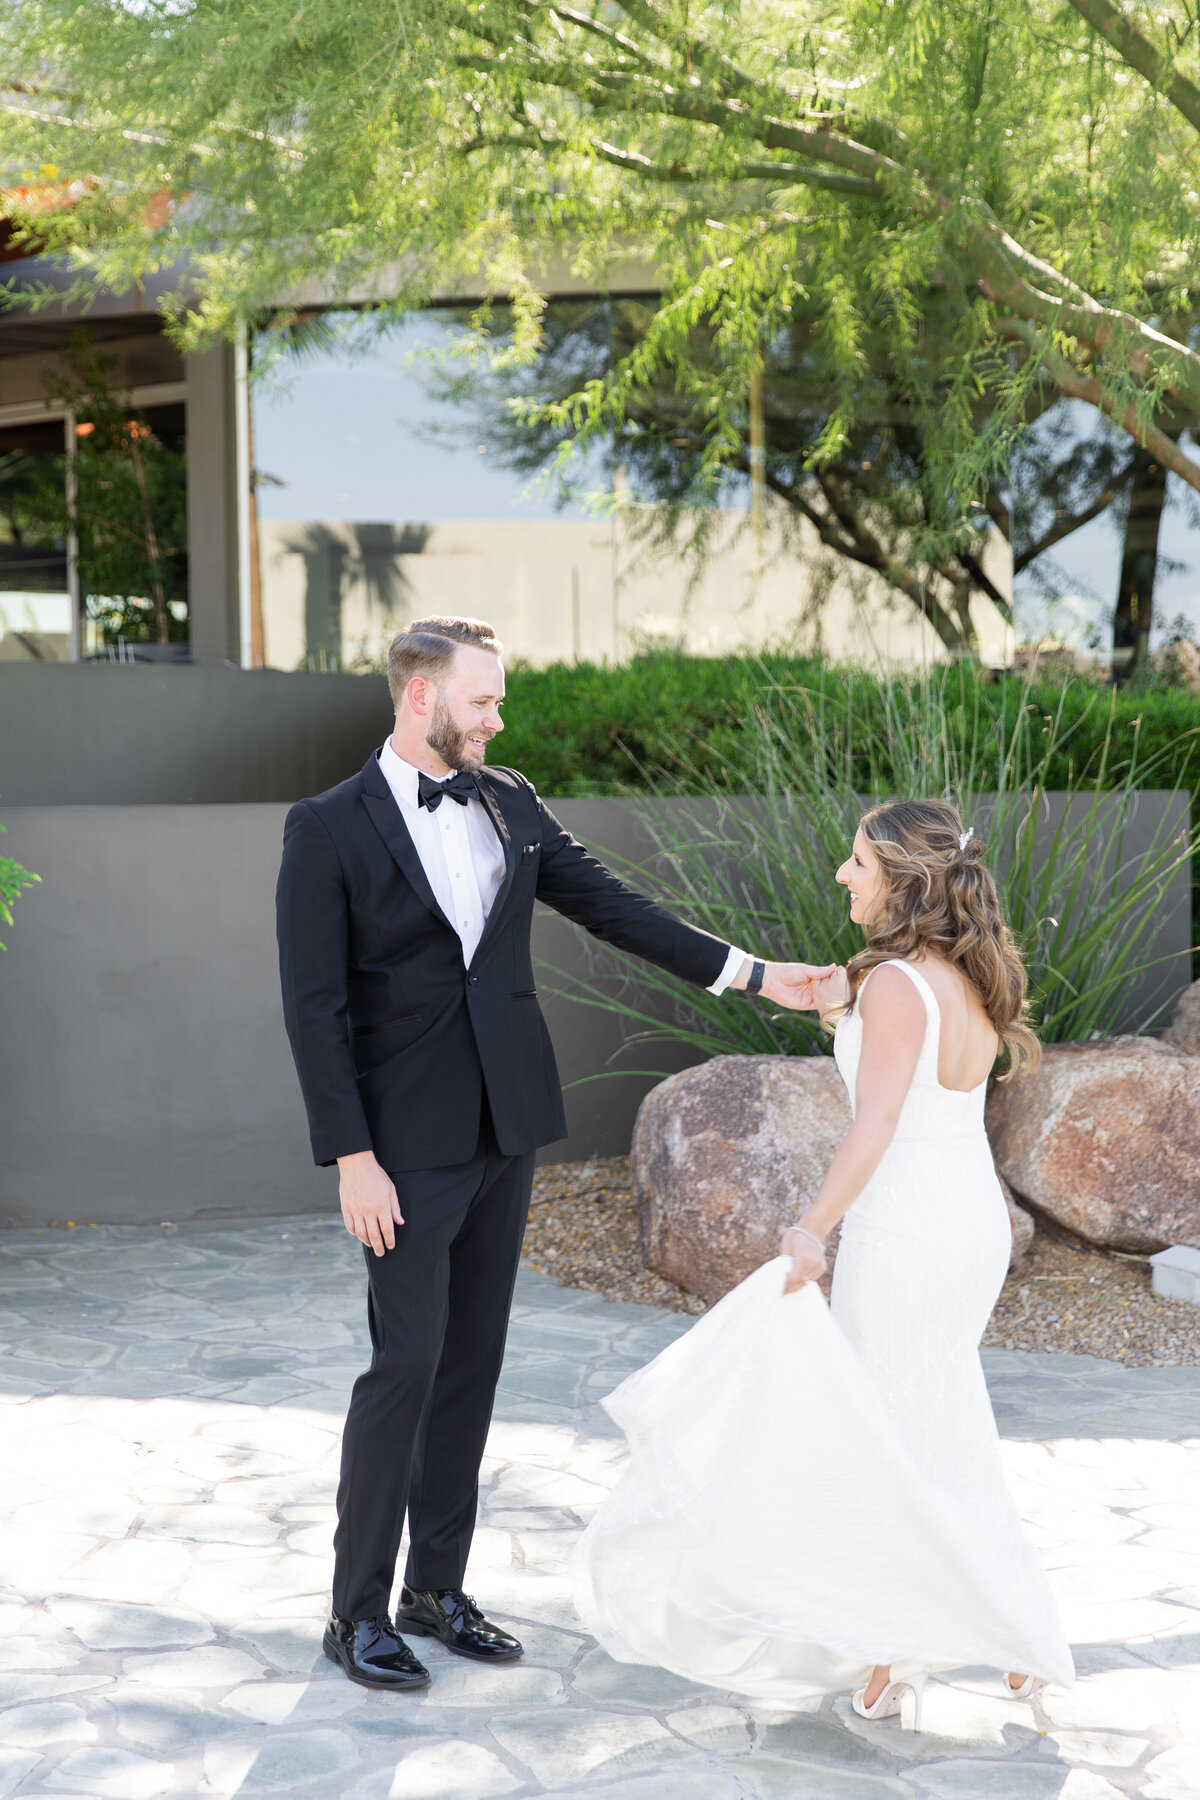 Karlie Colleen Photography - Josh & Jessica - Sanctuary Camelback Mountain Resort - Paradise Valley Arizona - Outstanding Occasions-71